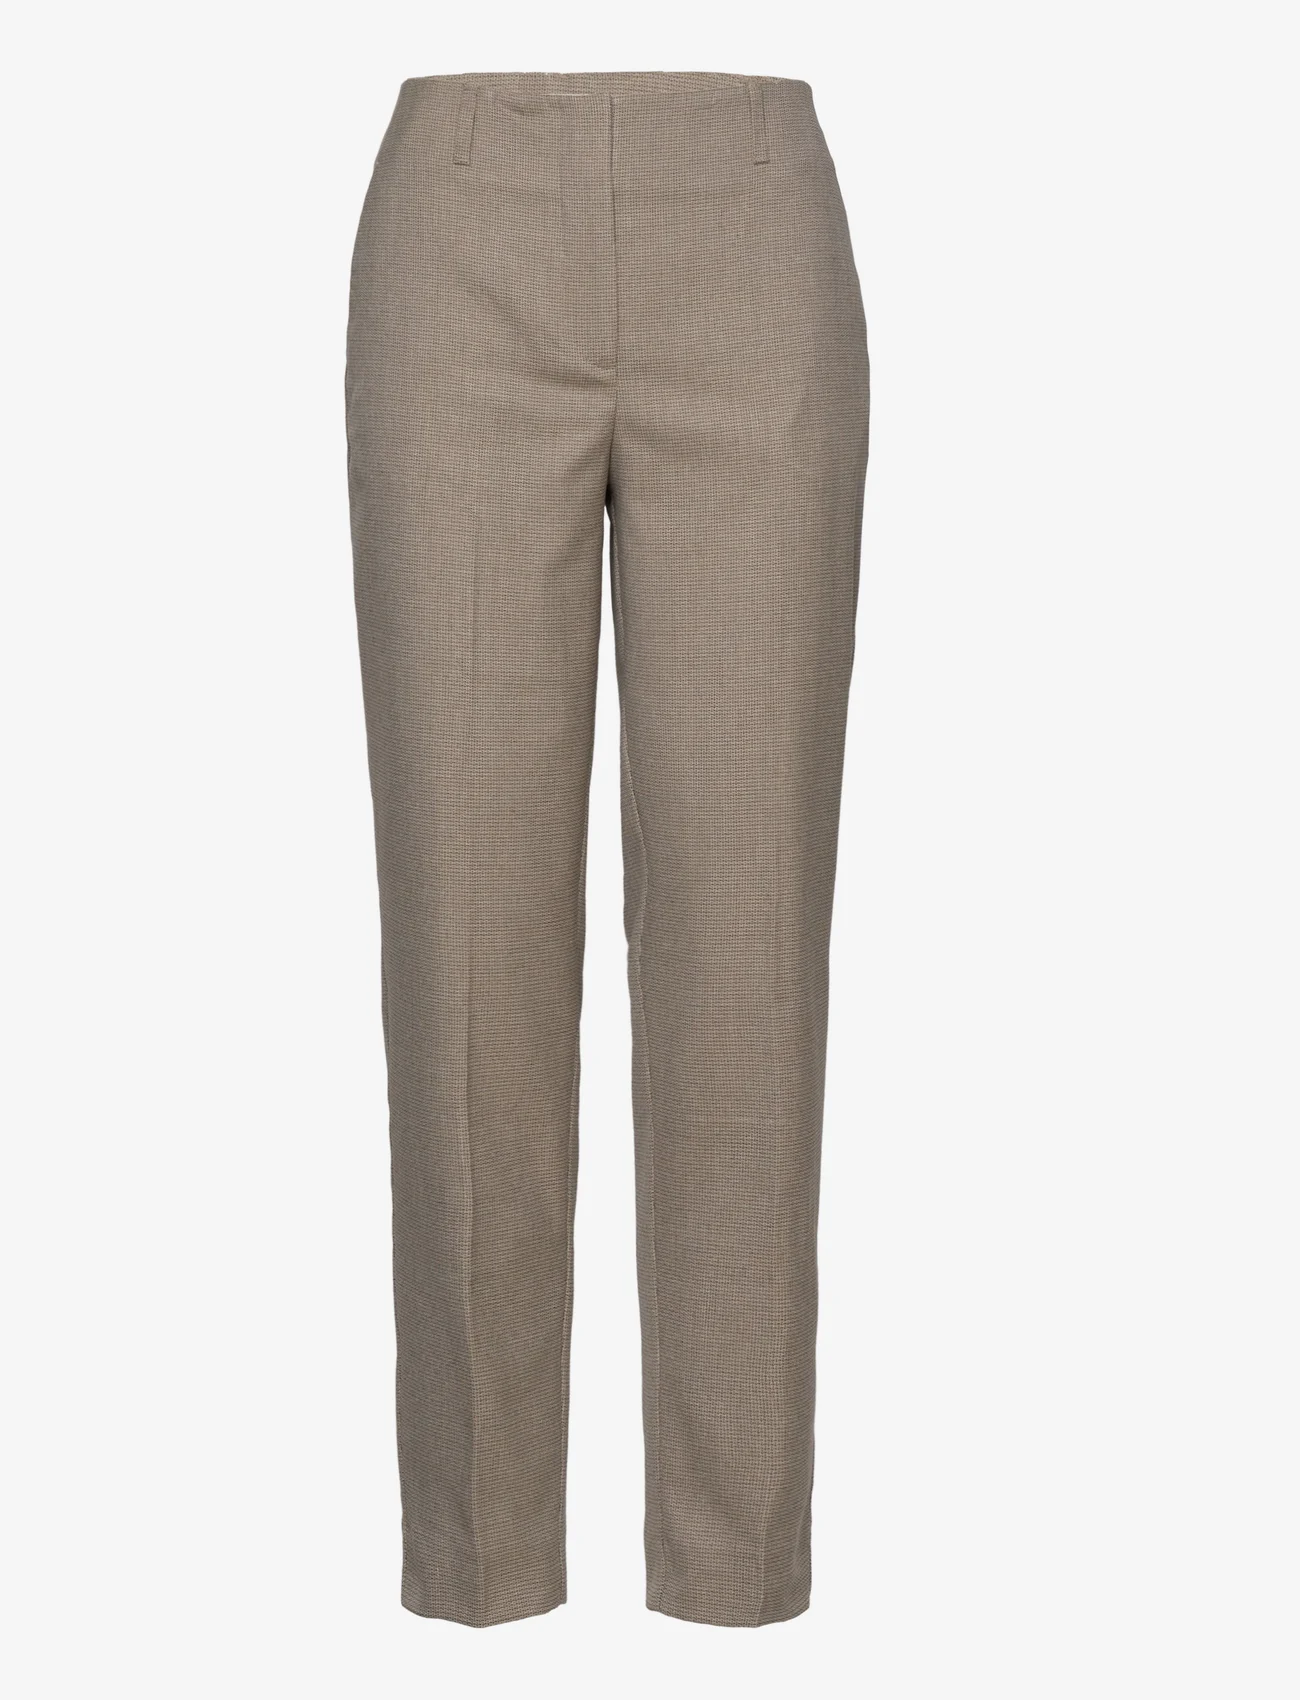 FIVEUNITS - JuliaFV - tailored trousers - sand brown mix - 0